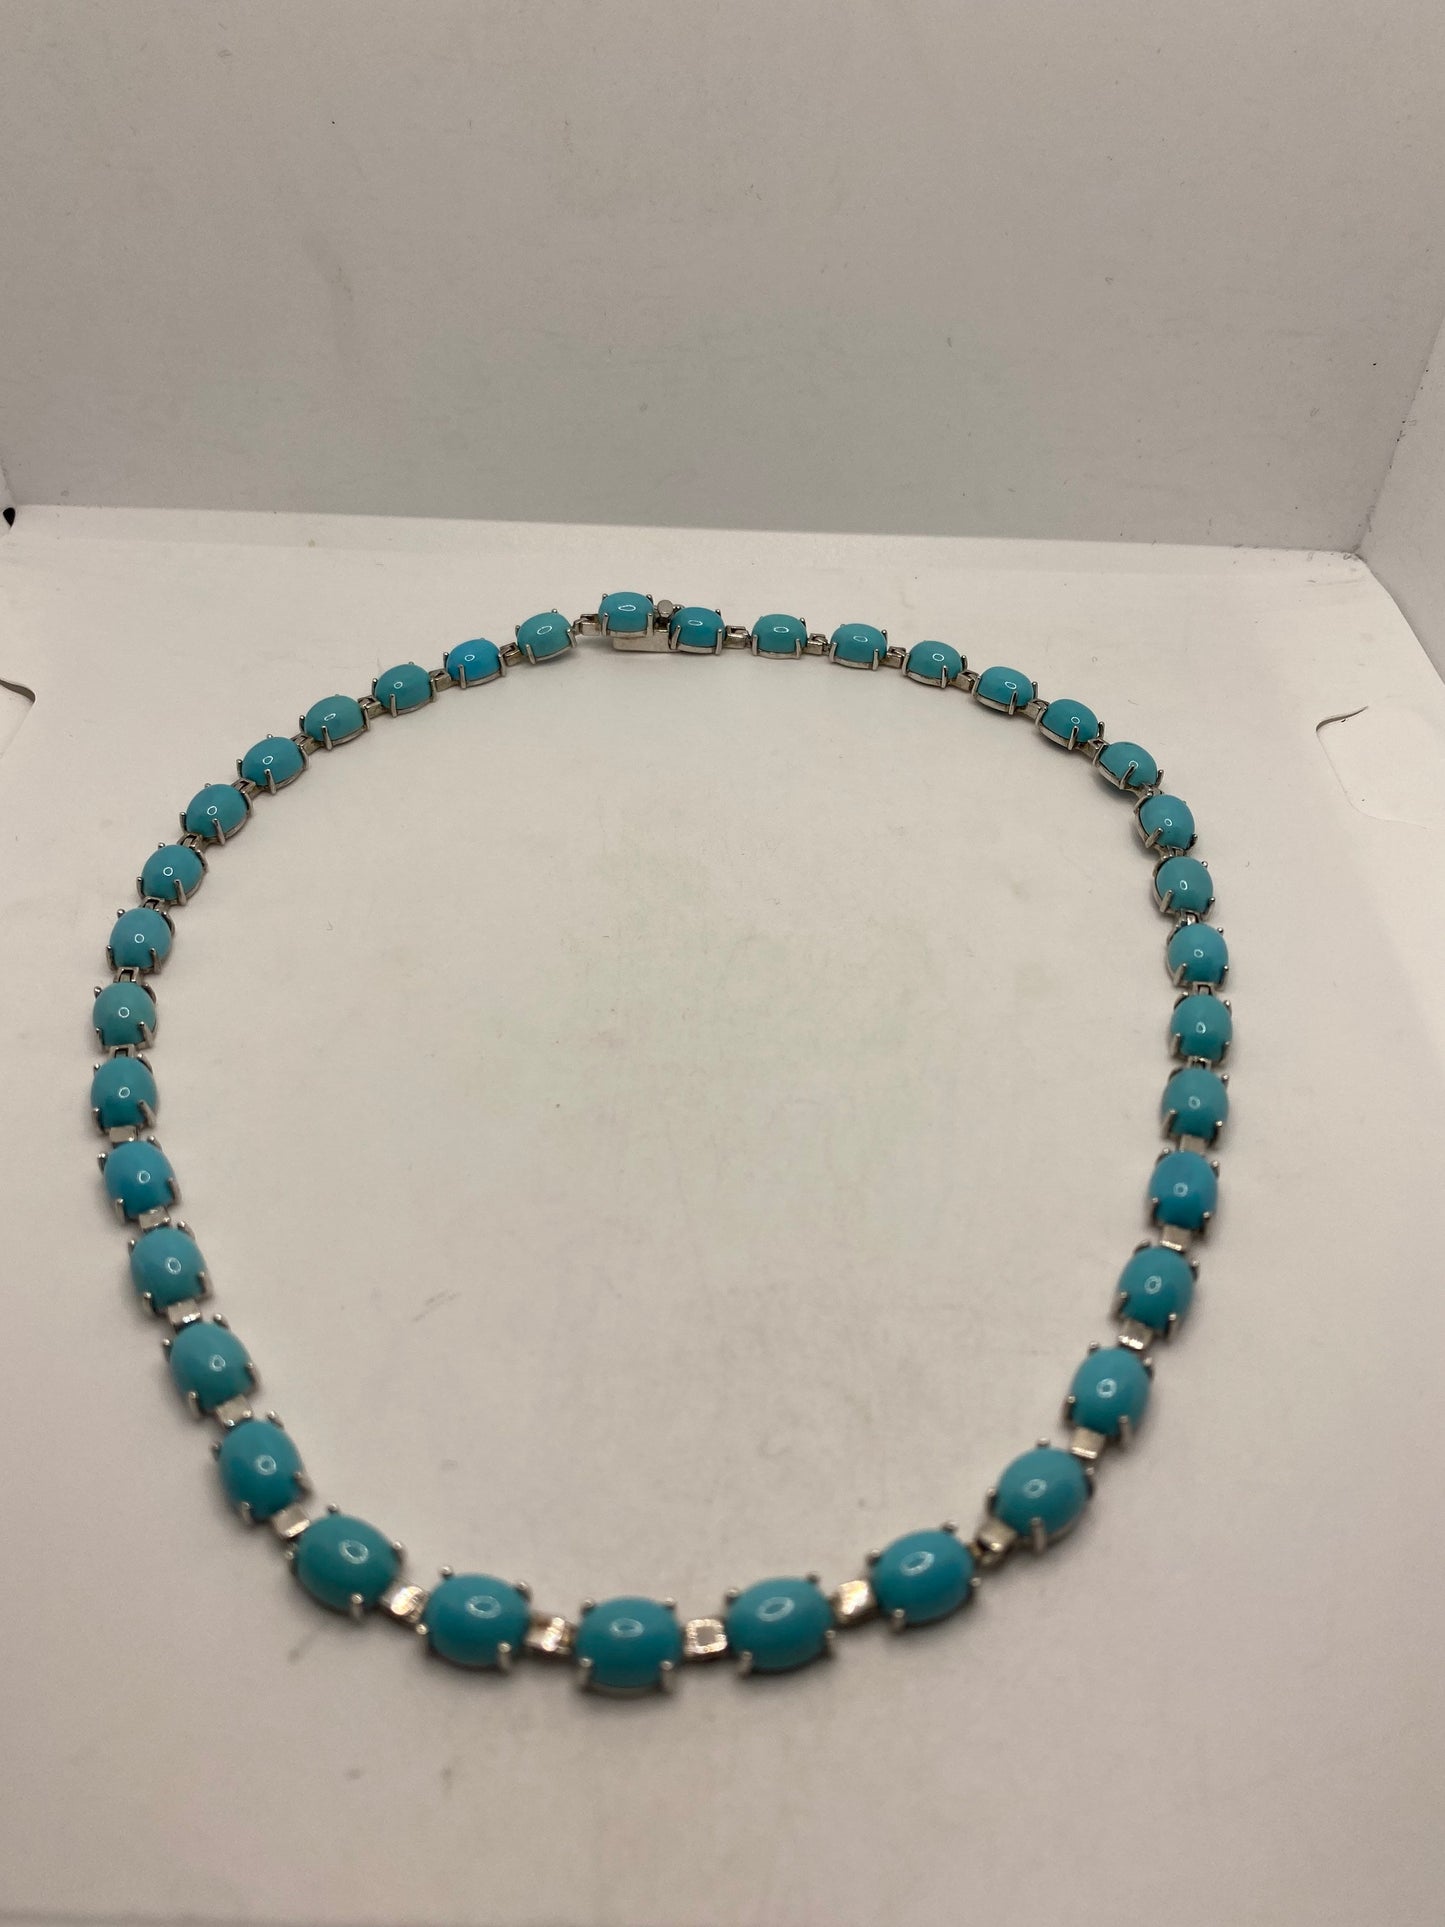 Vintage Moroccan Turquoise Necklace with 925 Sterling Silver